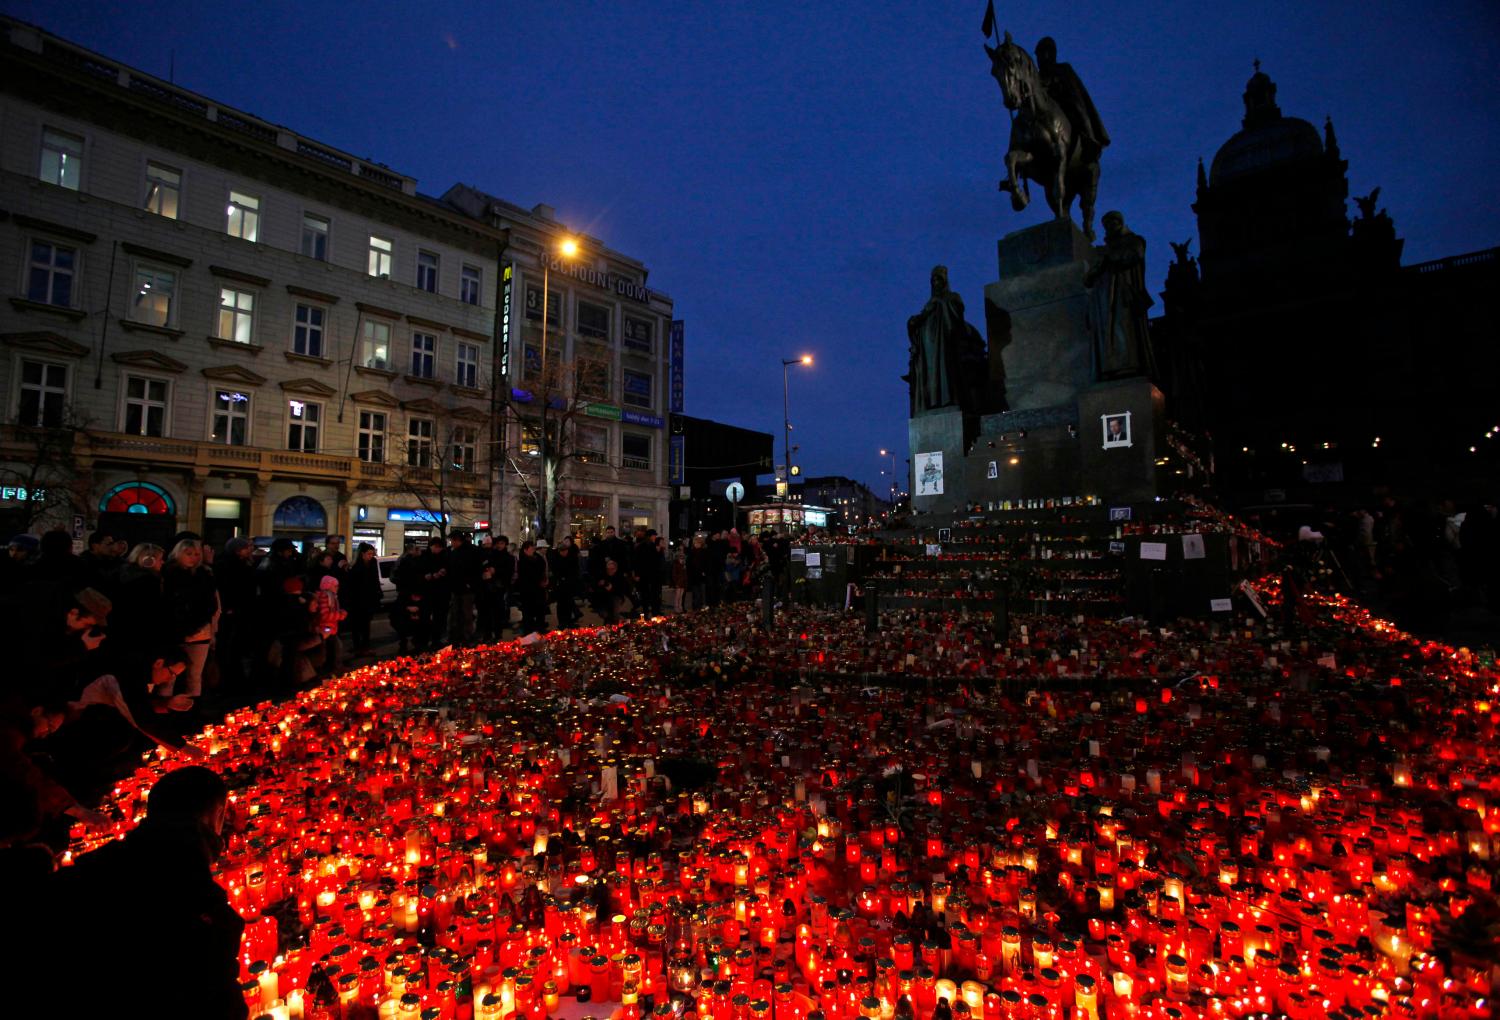 People light candles as they pay their respects to late former Czech President Vaclav Havel at Wenceslas Square in Prague December 22, 2011. Havel, an anti-Communist playwright who became Czech president and a worldwide symbol of peace and freedom after leading the bloodless "Velvet Revolution", died at the age of 75 on Sunday. His funeral mass will be held on Friday in the presence of dignitaries from around the world.          REUTERS/David W Cerny (CZECH REPUBLIC - Tags: OBITUARY POLITICS)